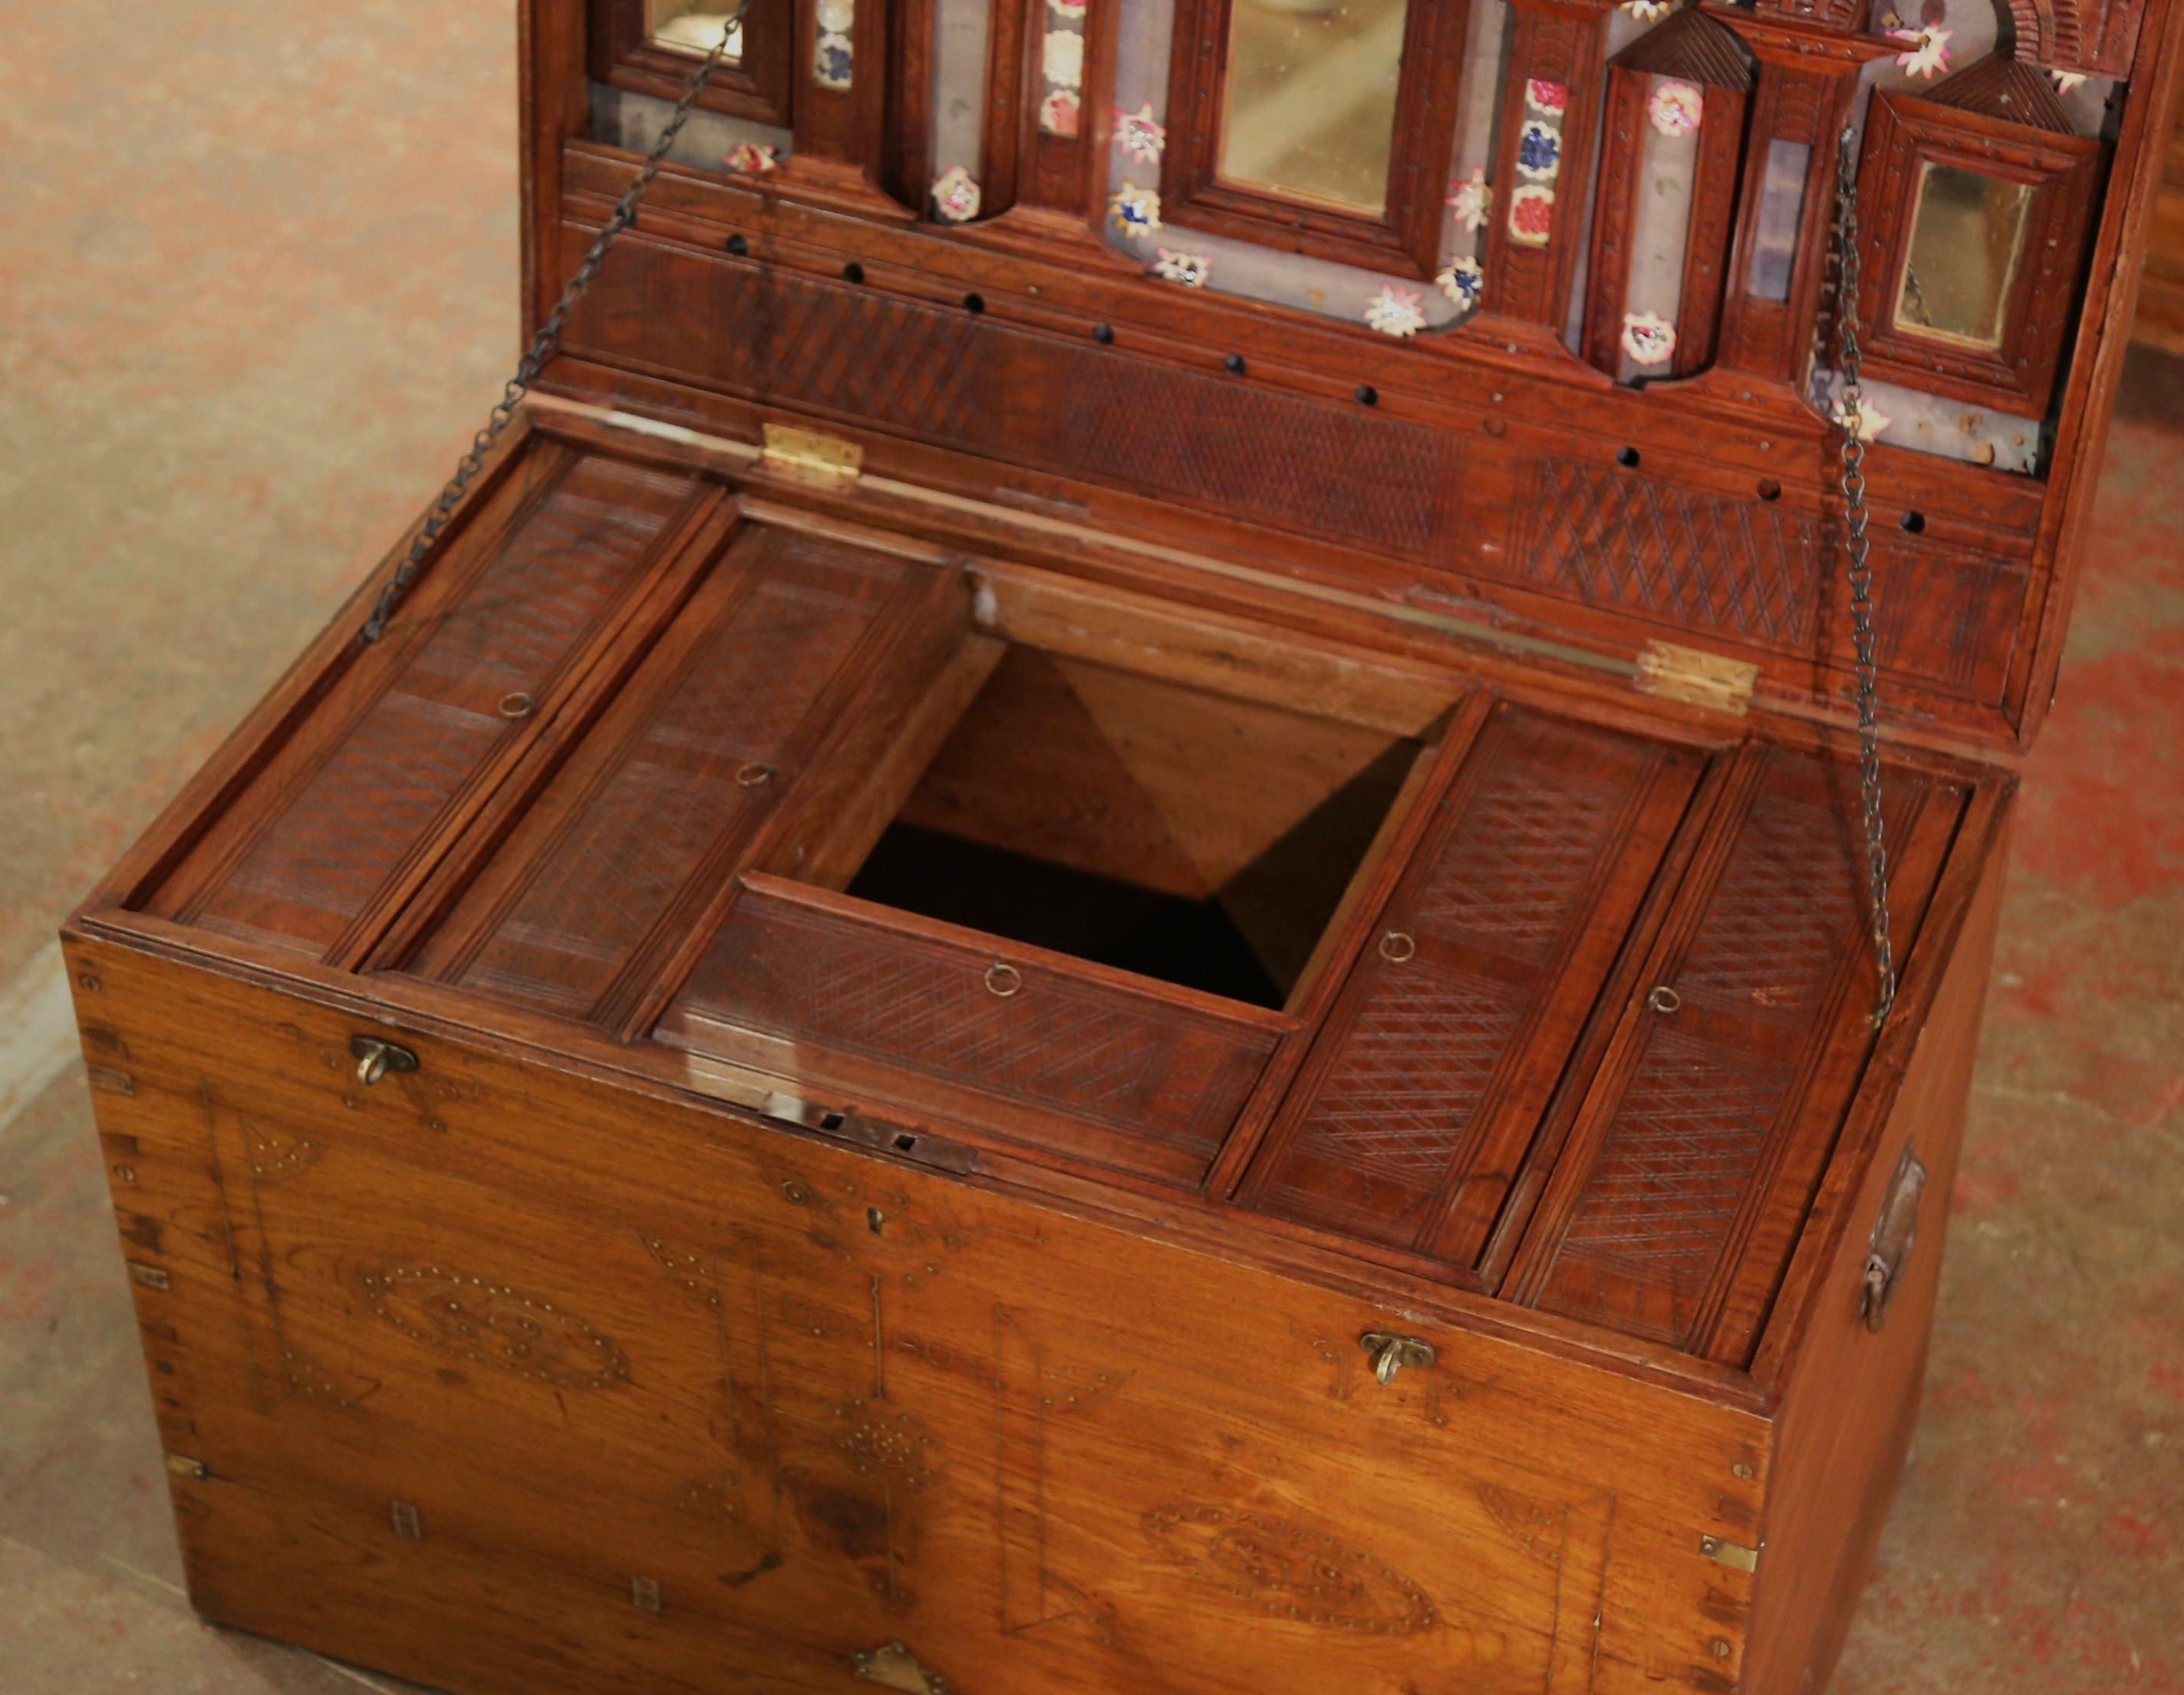 Hand-Carved 19th Century Burmese Carved Chestnut Trunk Coffee Table with Inside Compartments